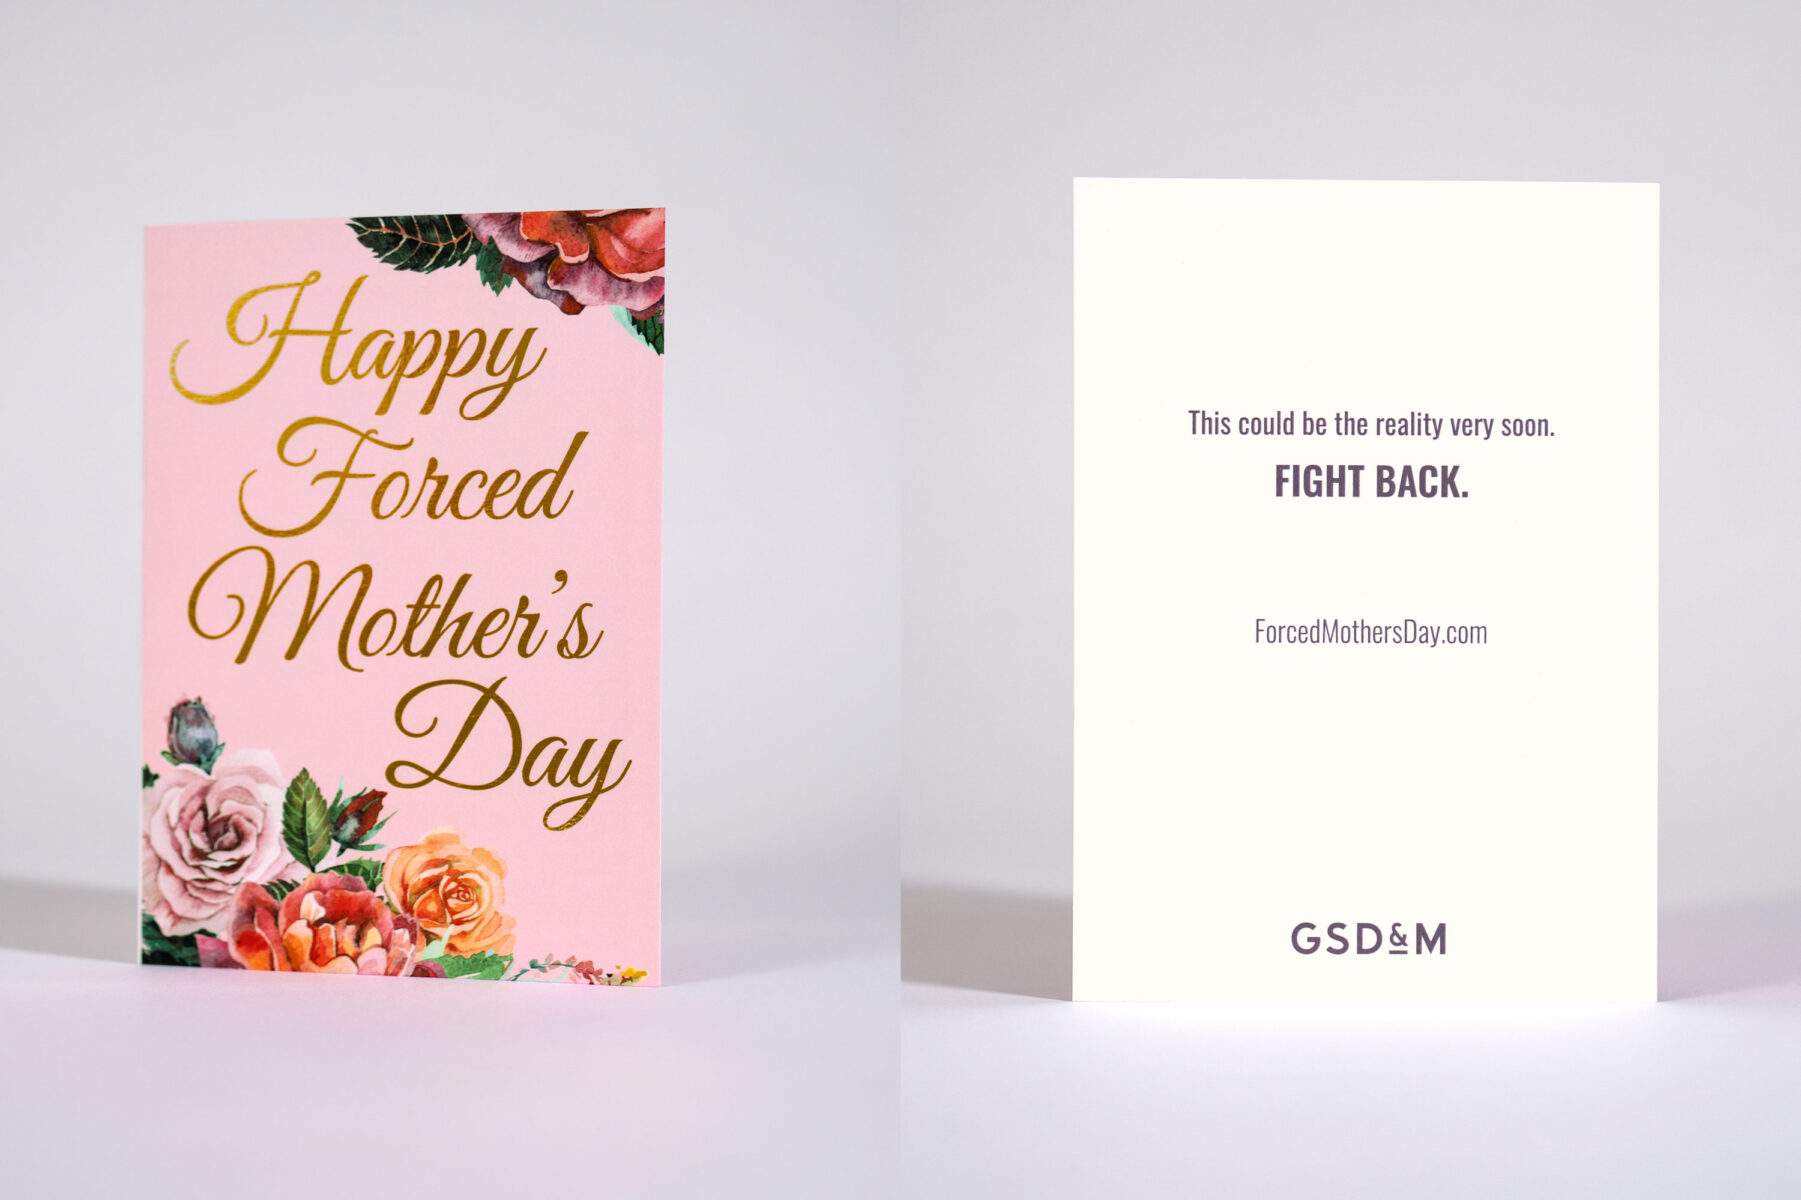 Forced Mothers Day GSD&M